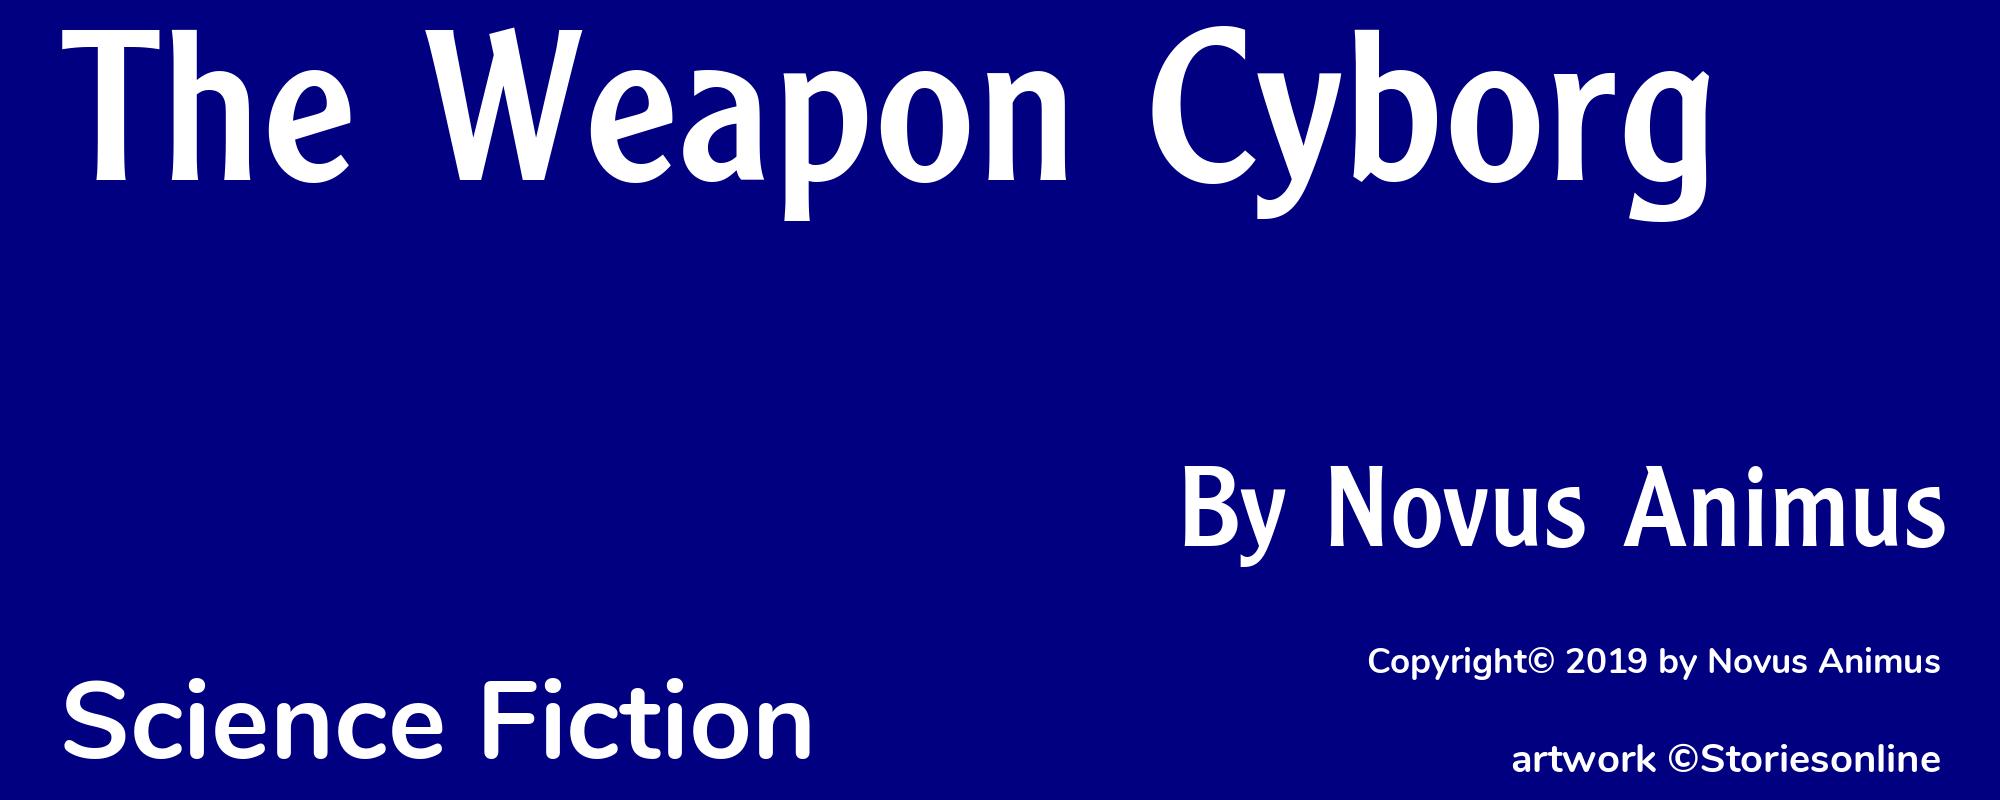 The Weapon Cyborg - Cover